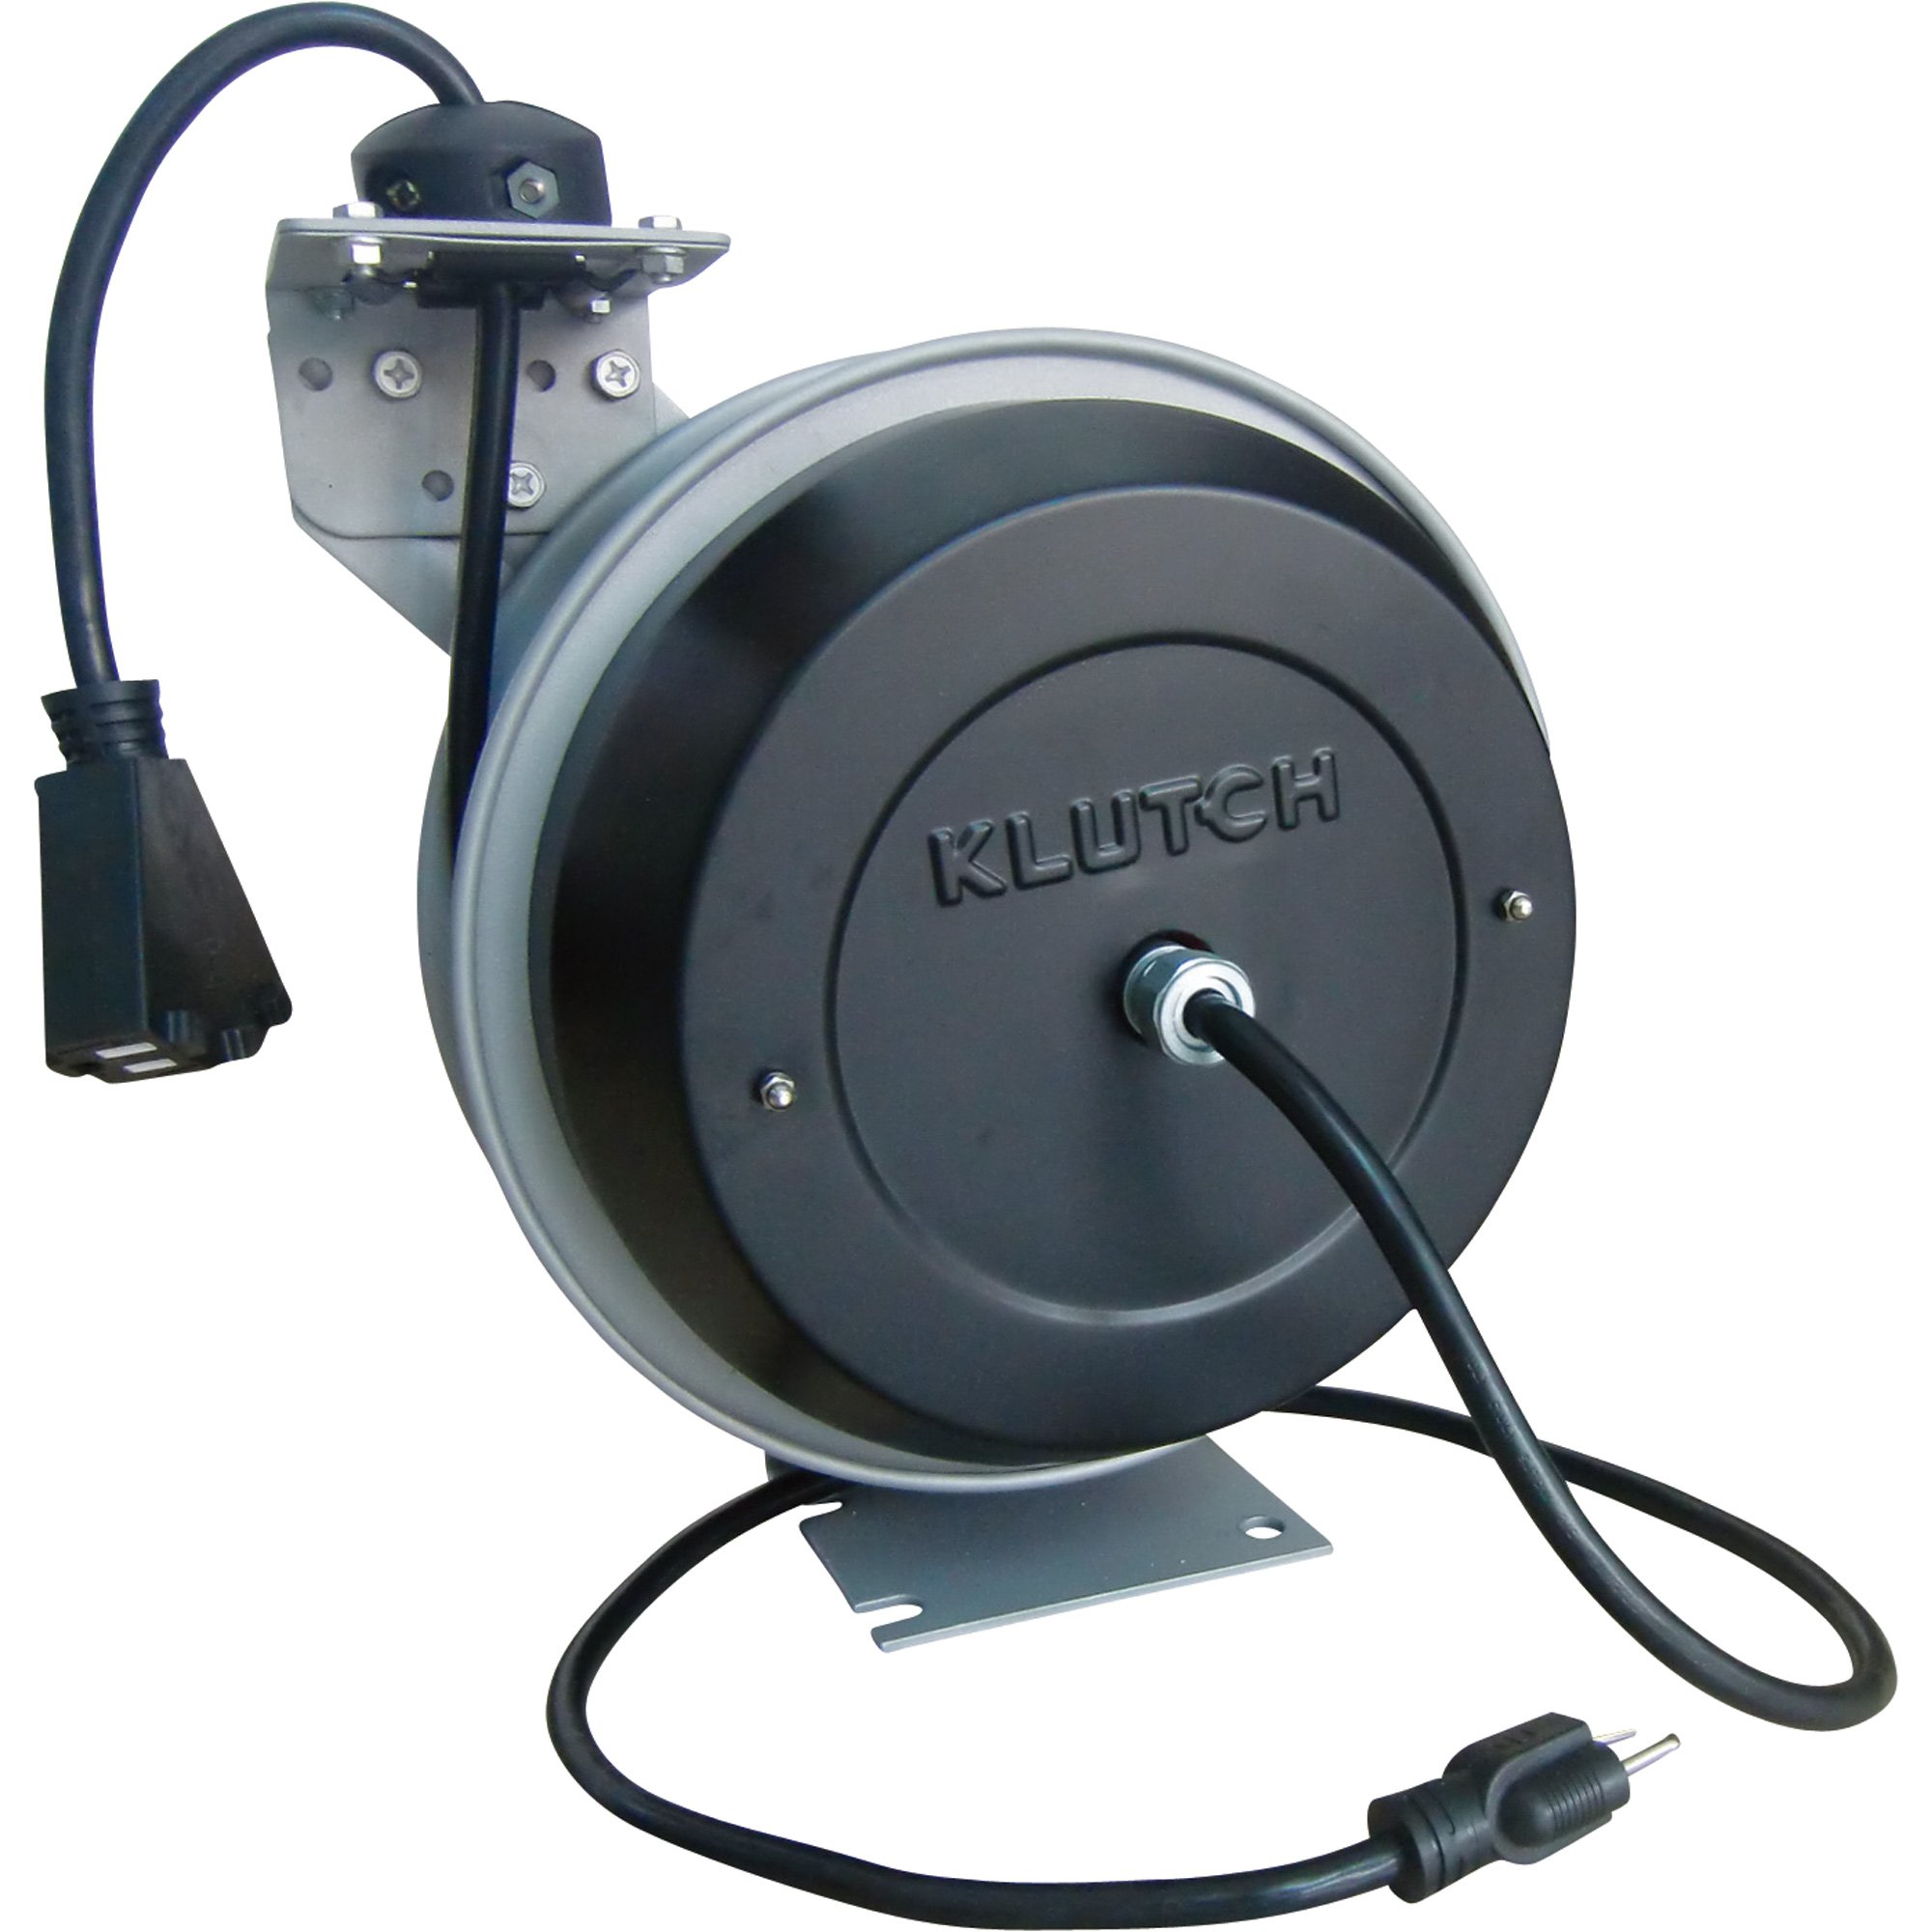 Please see replacement Item# 49582. Klutch Retractable Cord Reel